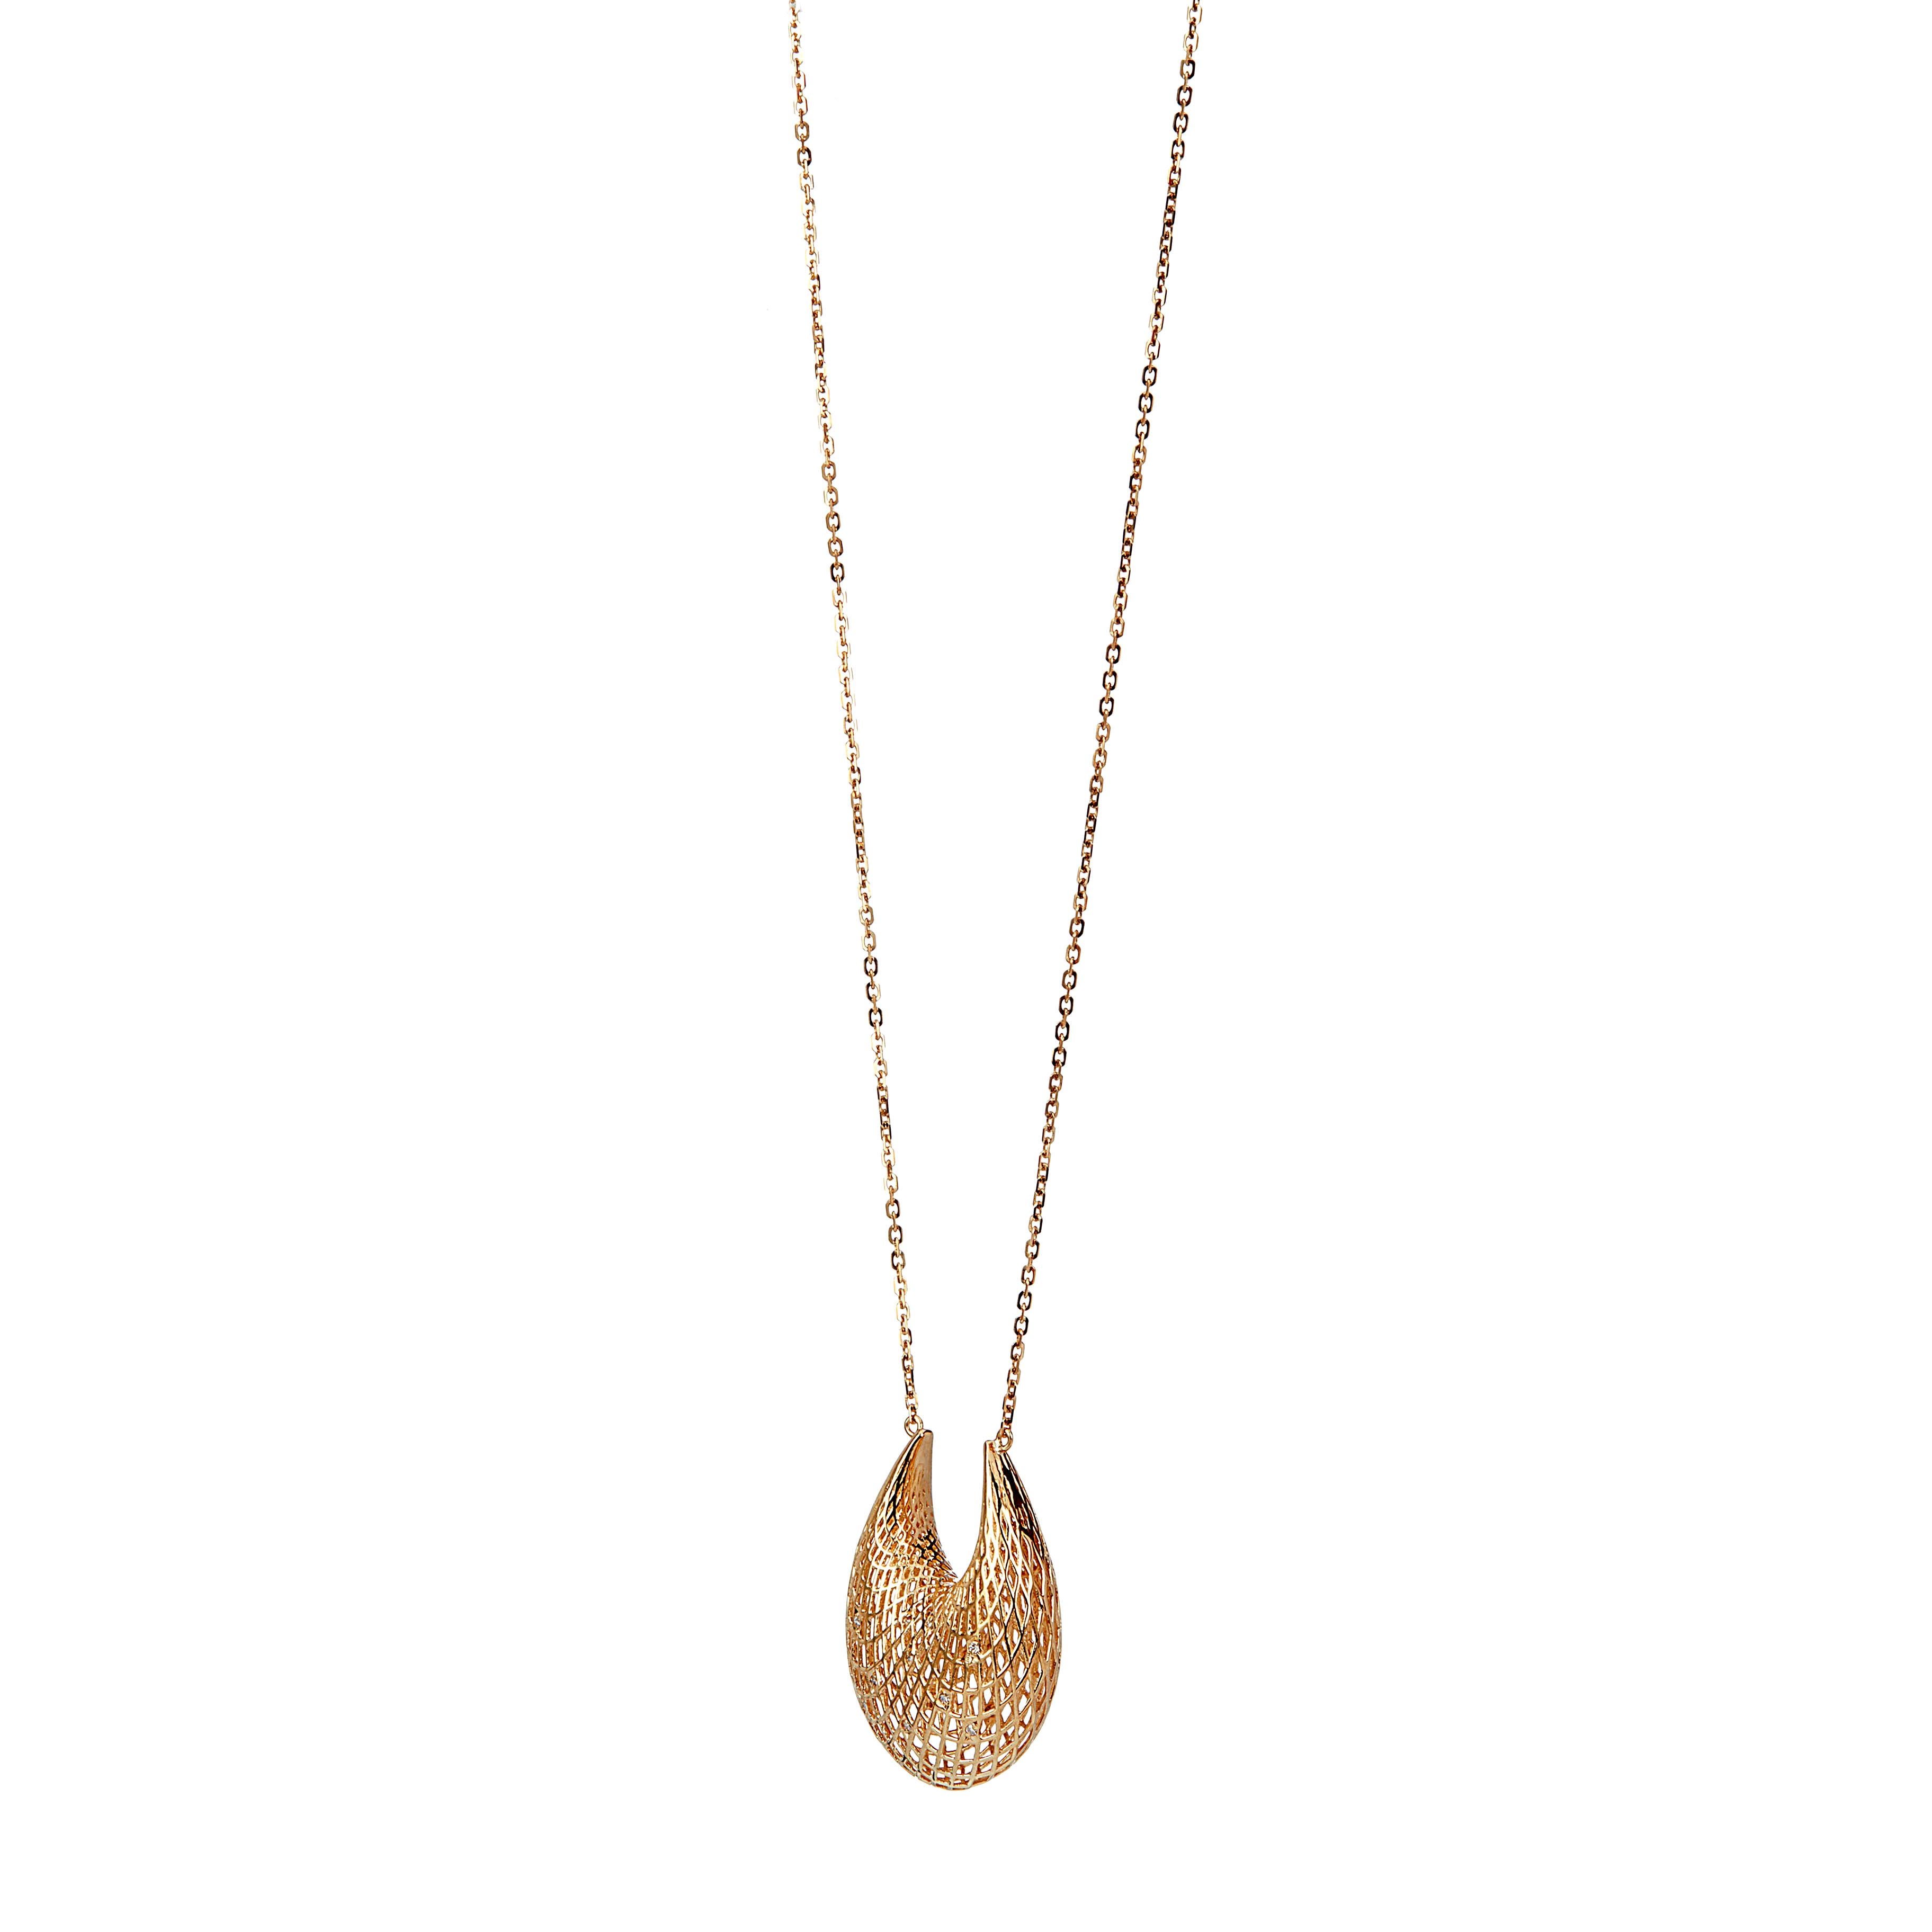 Round Cut Yemyungji Diamond 18K Yellow Gold Blooming Long Chain Necklace For Sale